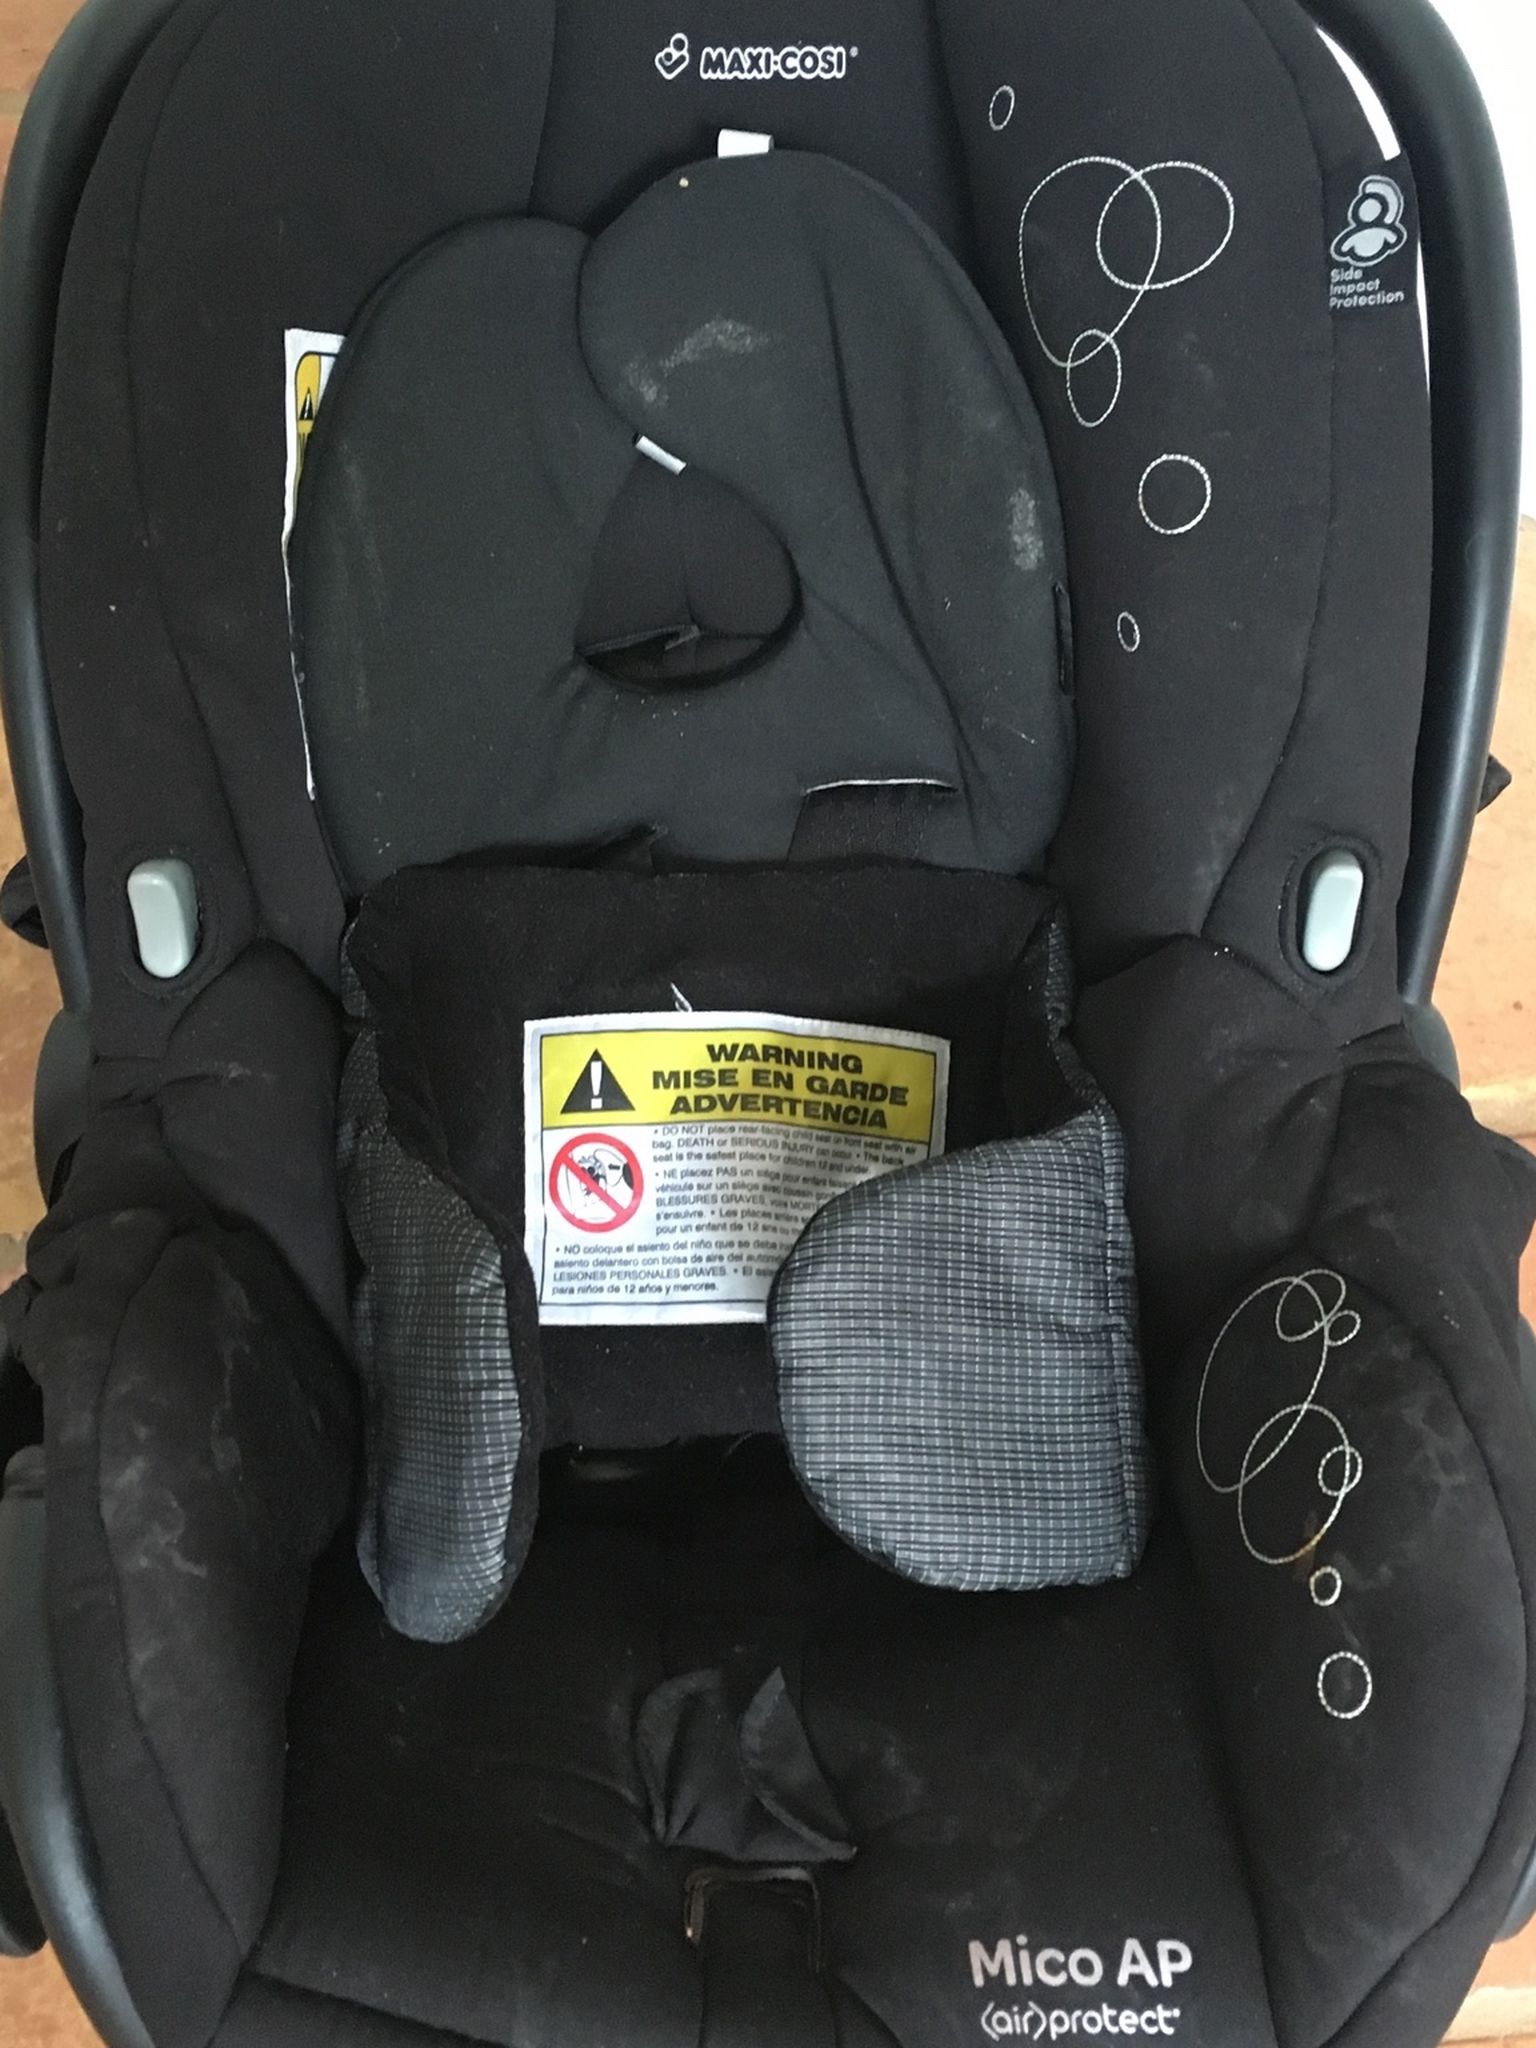 Maxi Cosi Ap Infant Car Seat... Only Here Till Sunday.. Make A Good Offer And It’s Yours